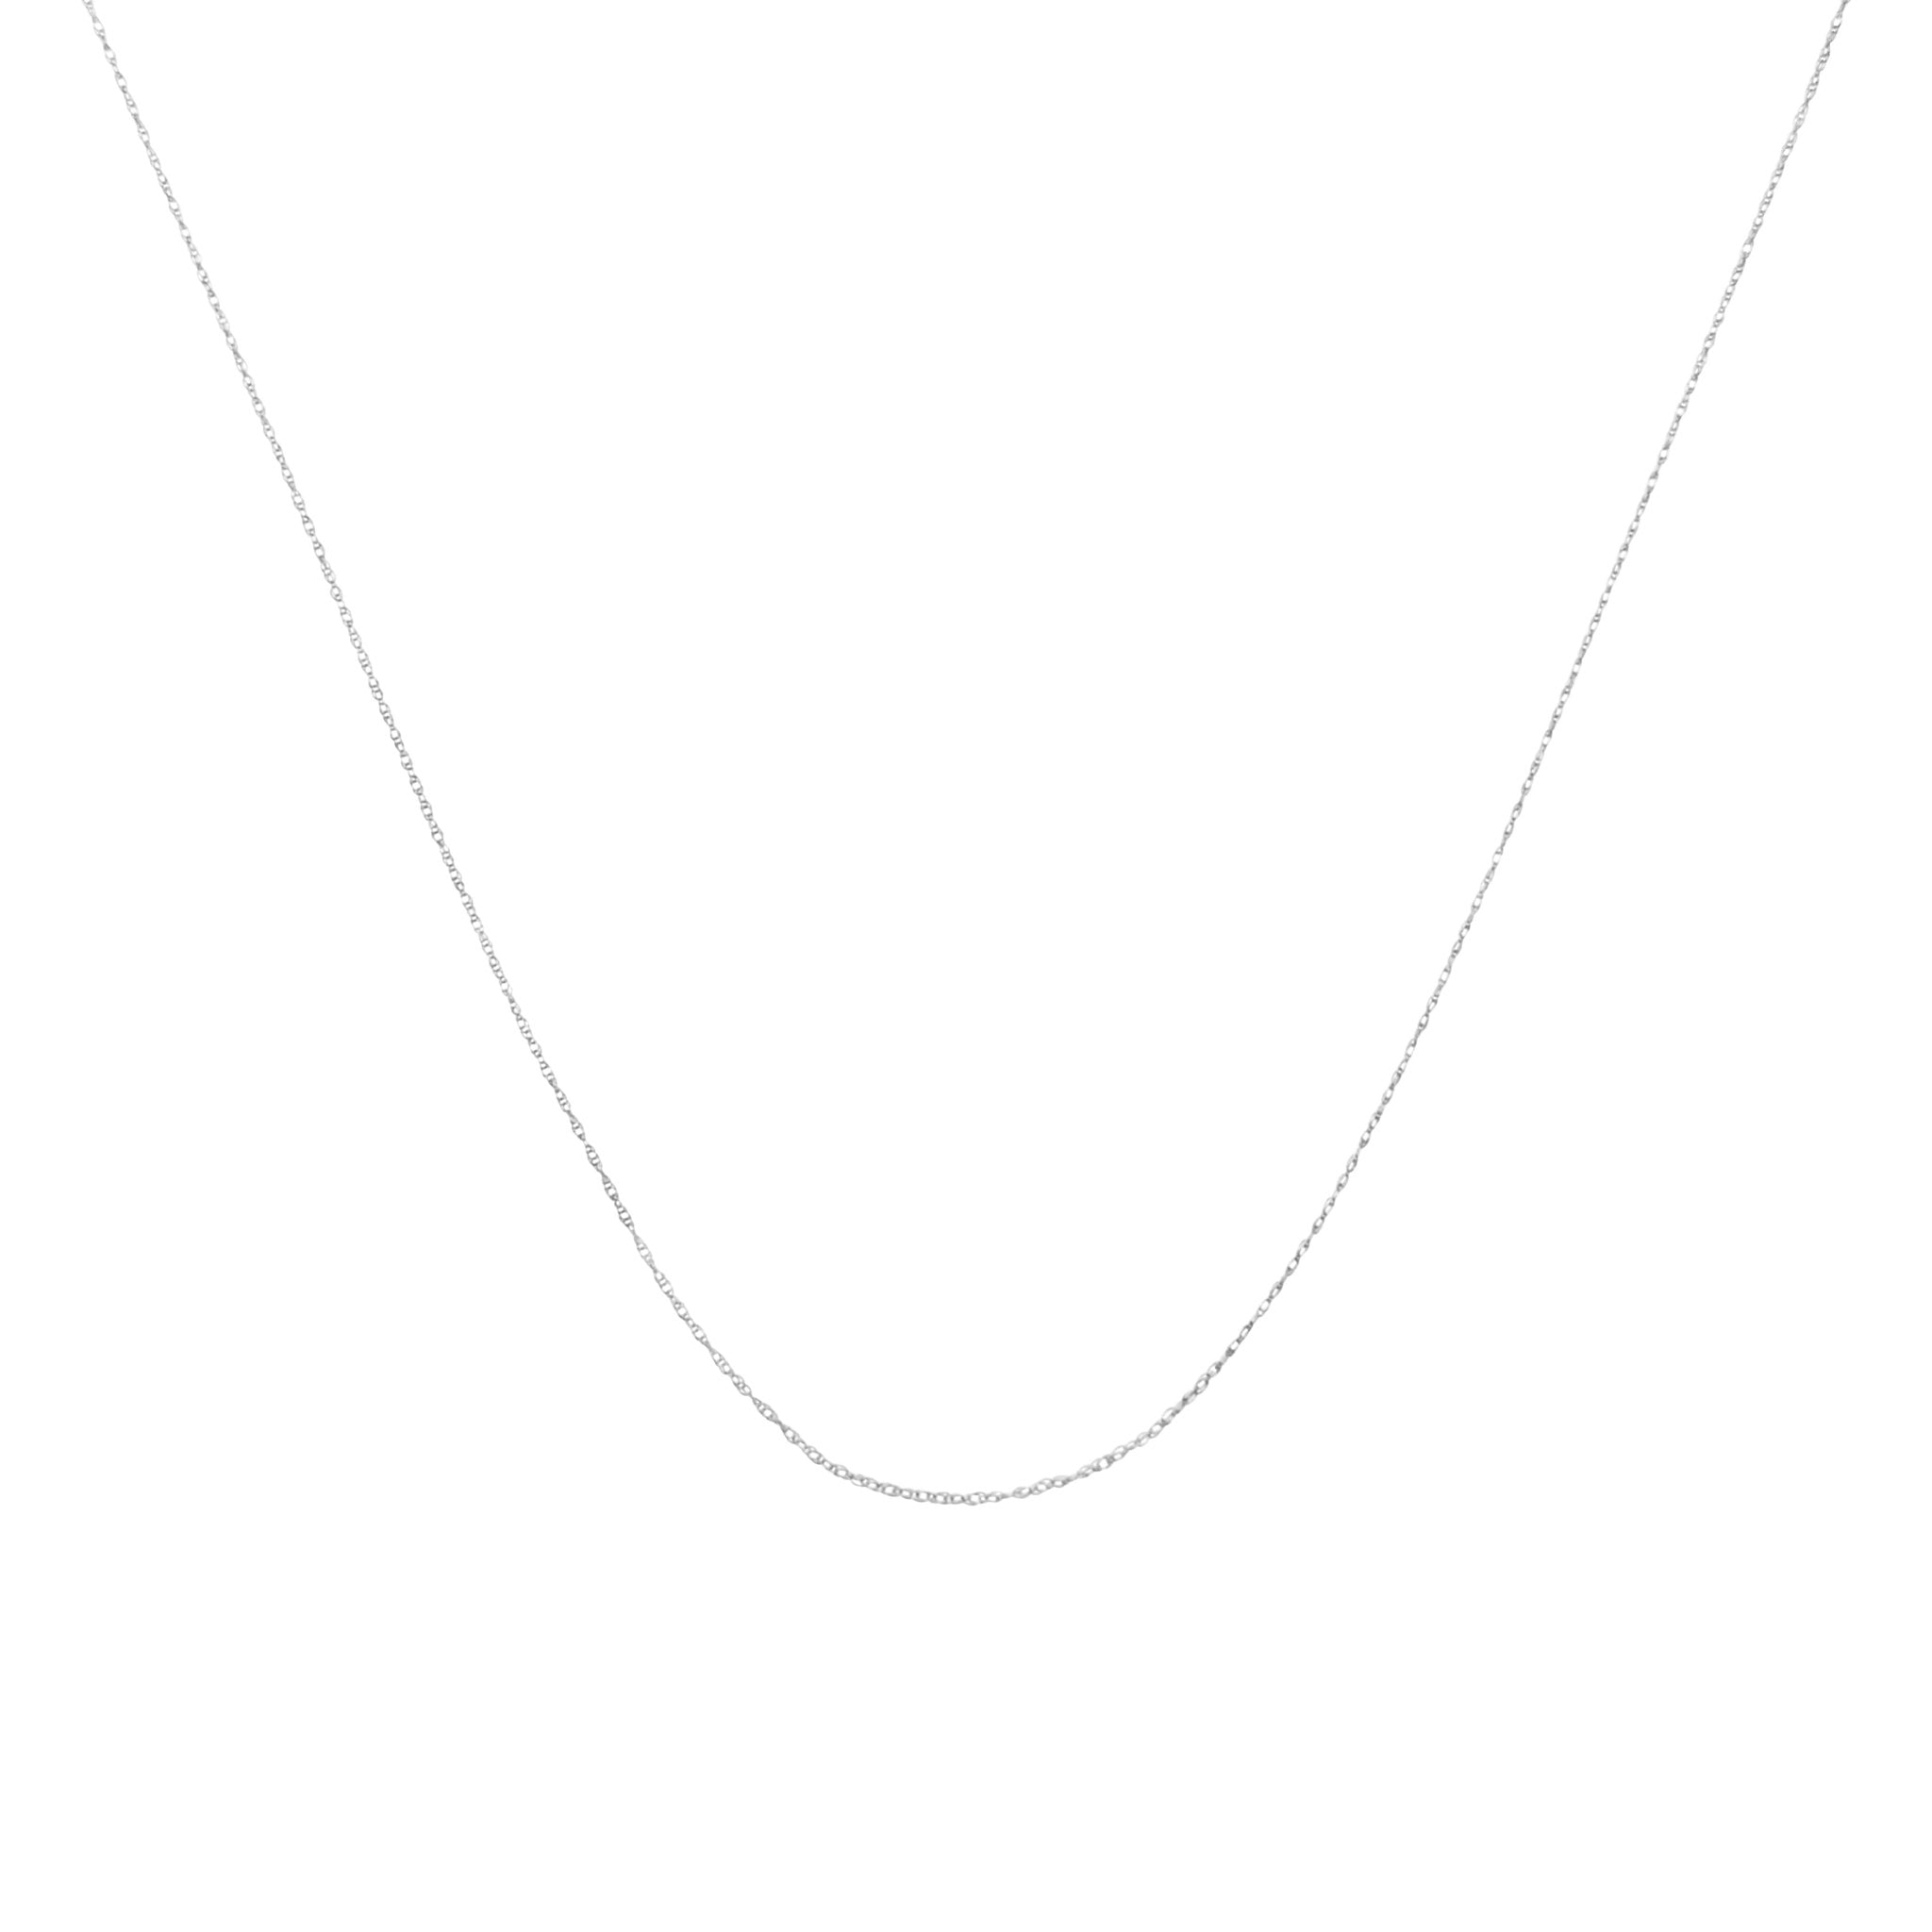 Solid 10K White Gold 0.5Mm Rope Chain Necklace. Unisex Chain - Size 20" Inches - Tuesday Morning-Chain Necklaces